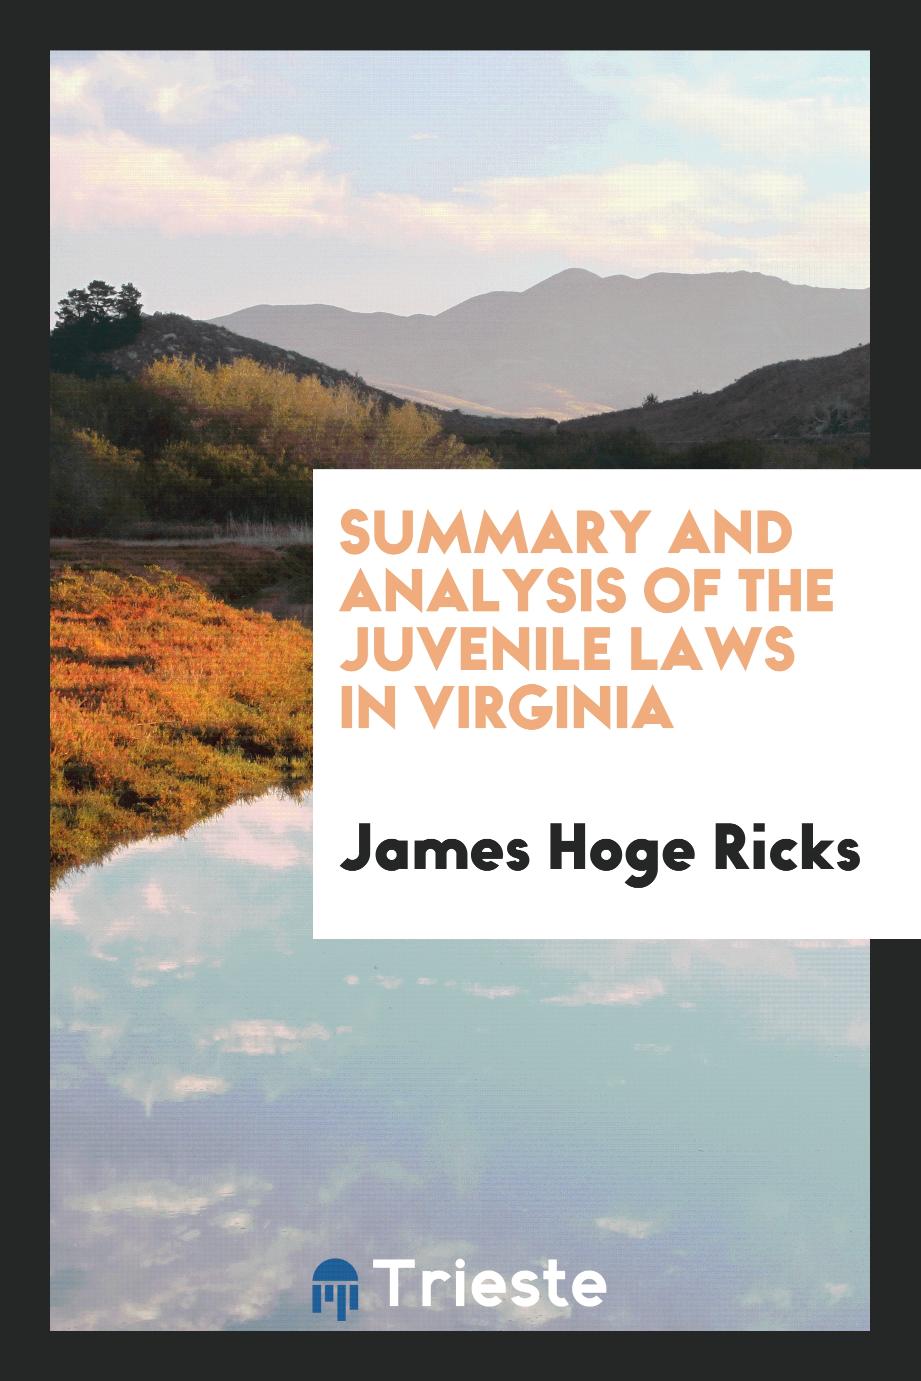 Summary and analysis of the juvenile laws in Virginia